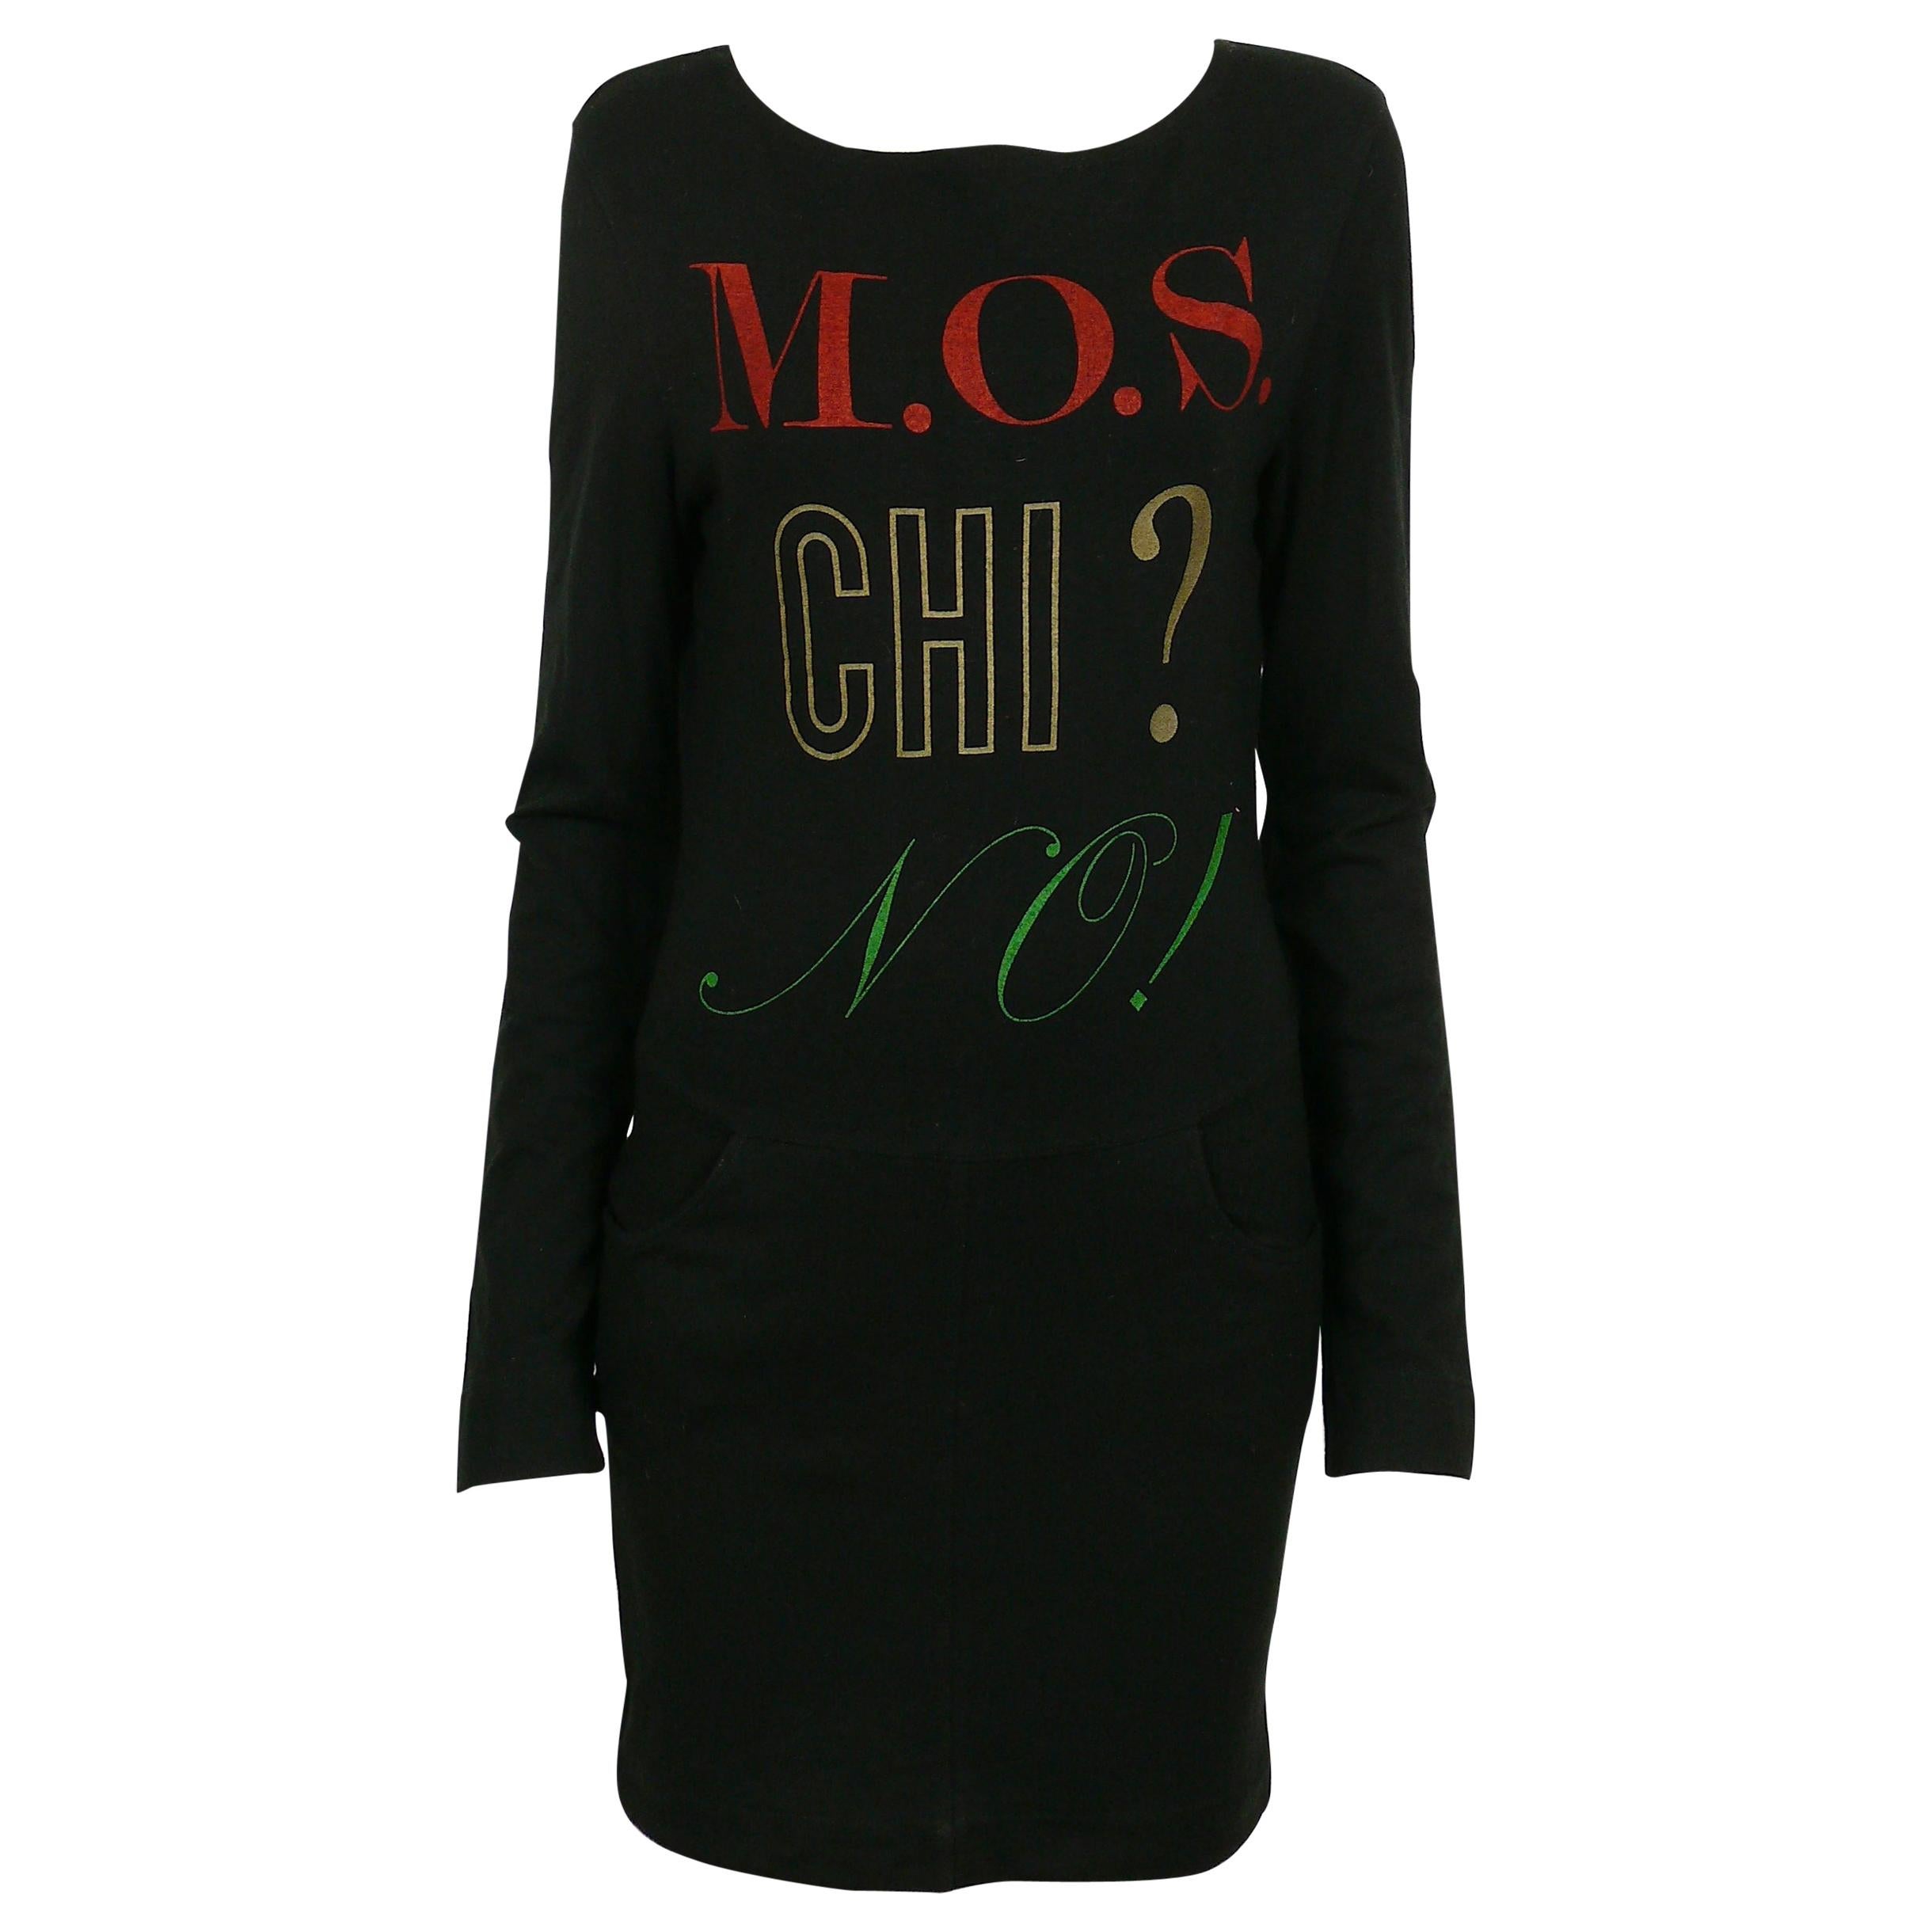 Moschino Vintage Graphic Print "M.O.S. CHI? NO!" Mini Dress US Size 12 For Sale